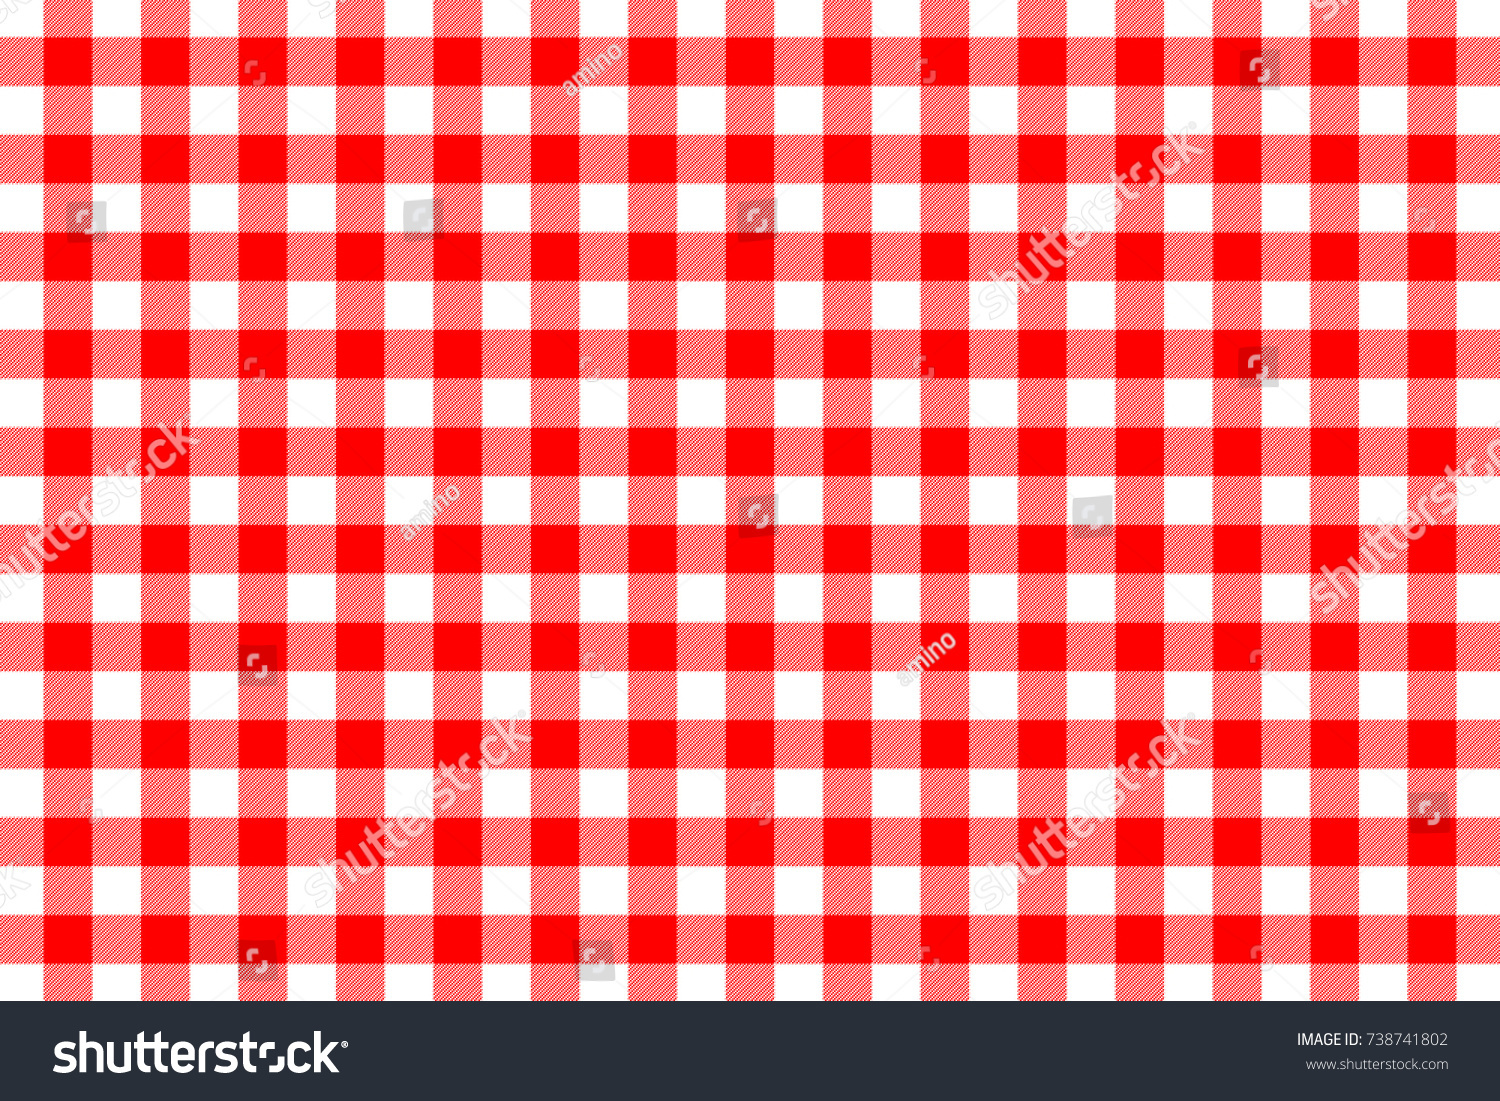 Red Gingham Pattern Texture Rhombussquares Plaid Stock Vector (Royalty ...